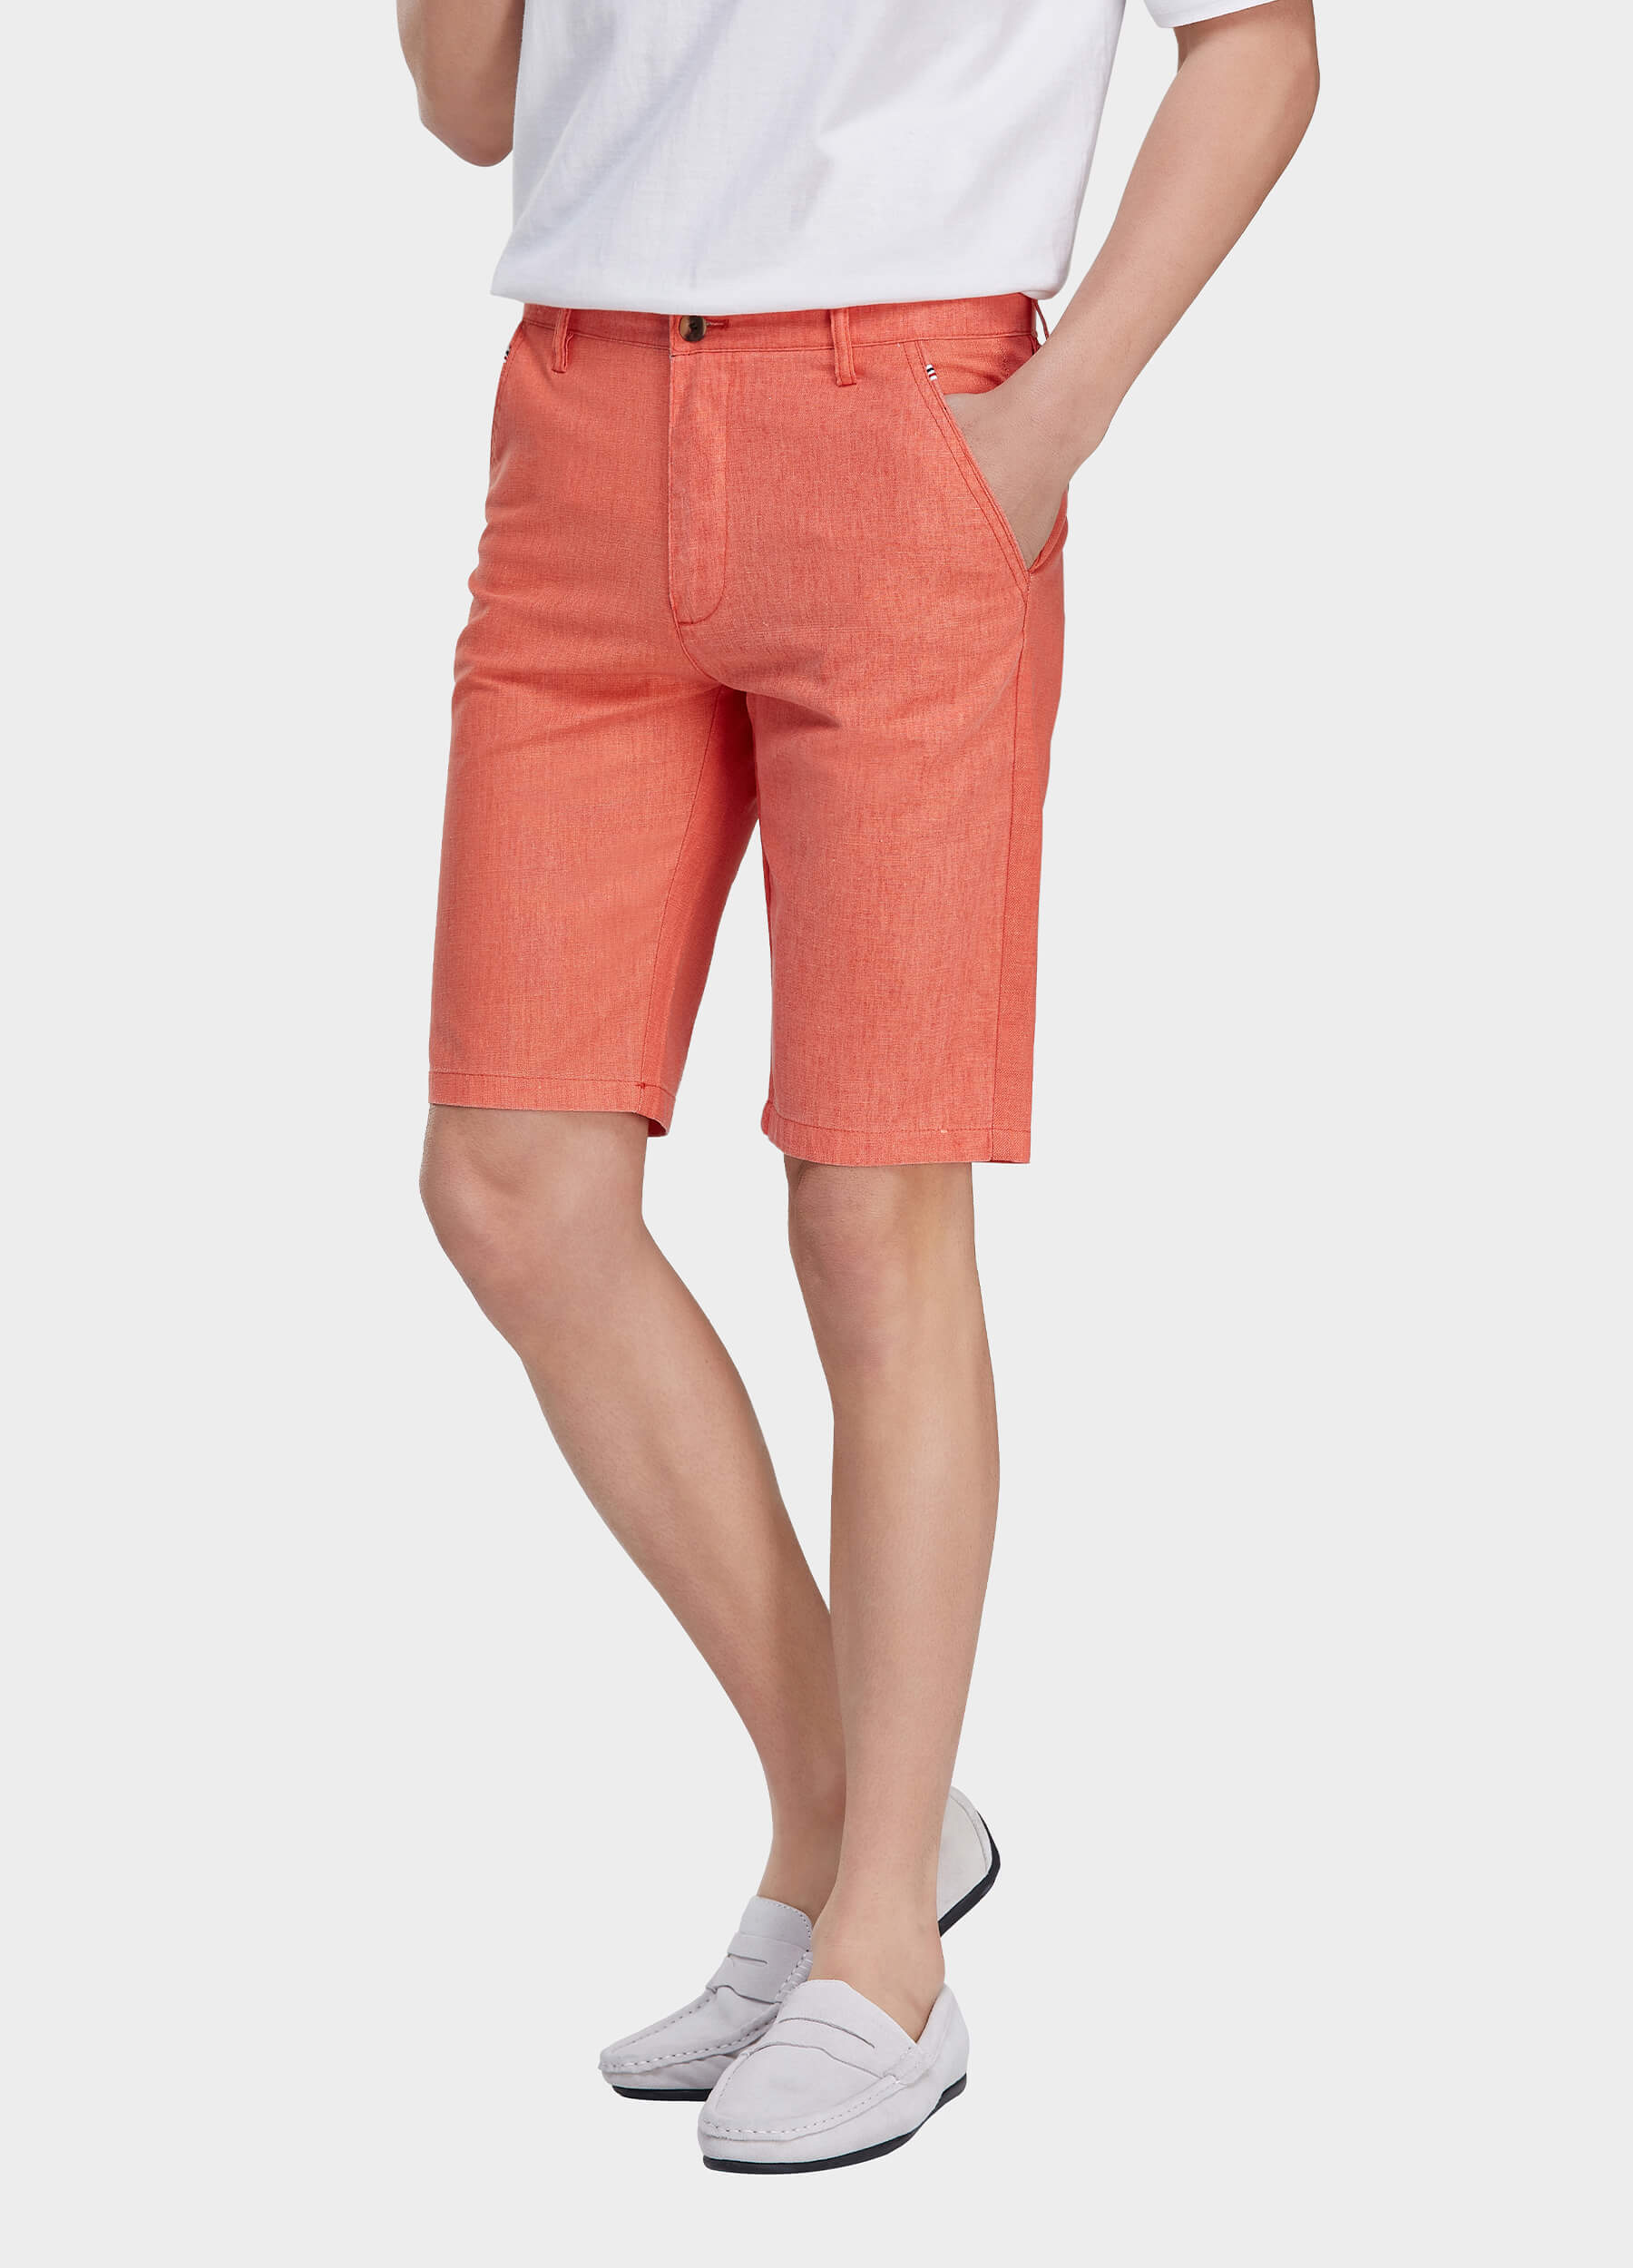 Men's Casual Solid Zipper Fly Button Walk Shorts with Slant Pockets-Candy pink